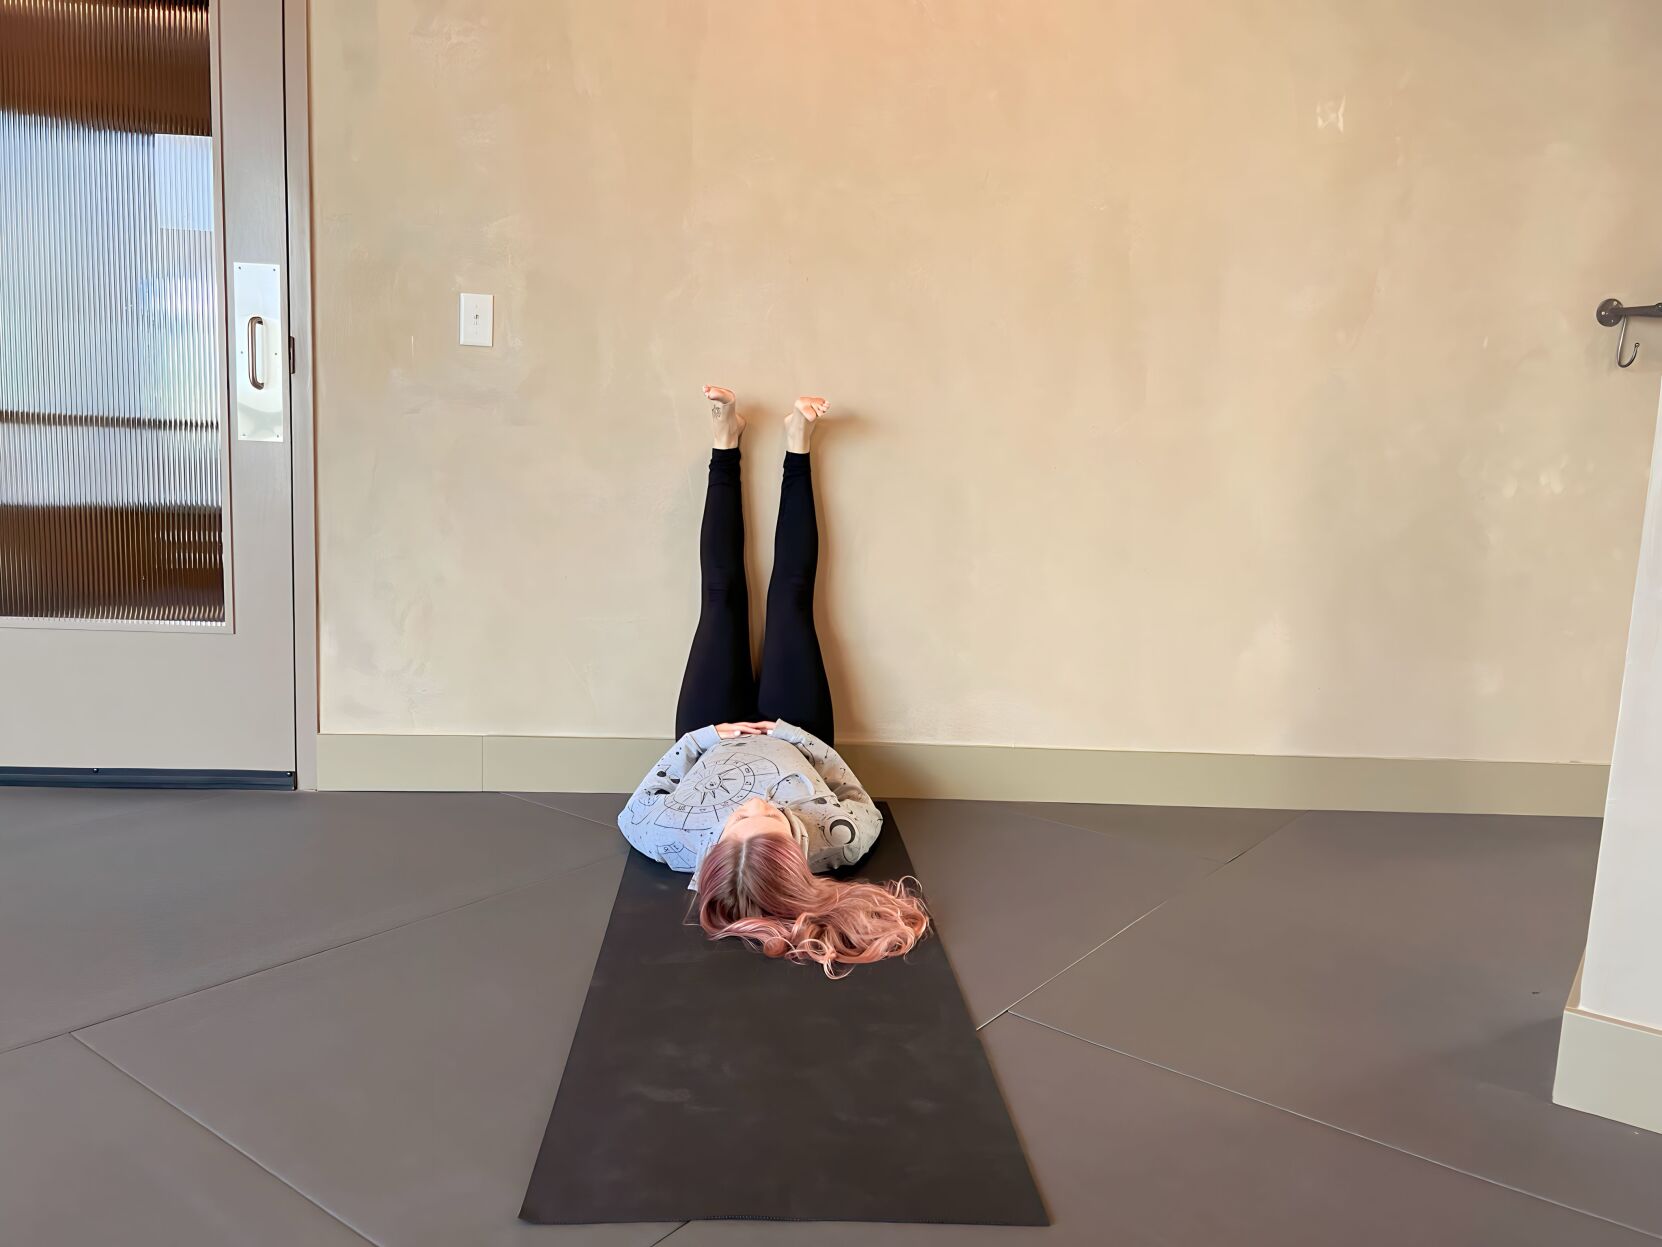 3 Wall Yoga Poses for Sleep 😴 💤 | Gallery posted by Lee | Lemon8